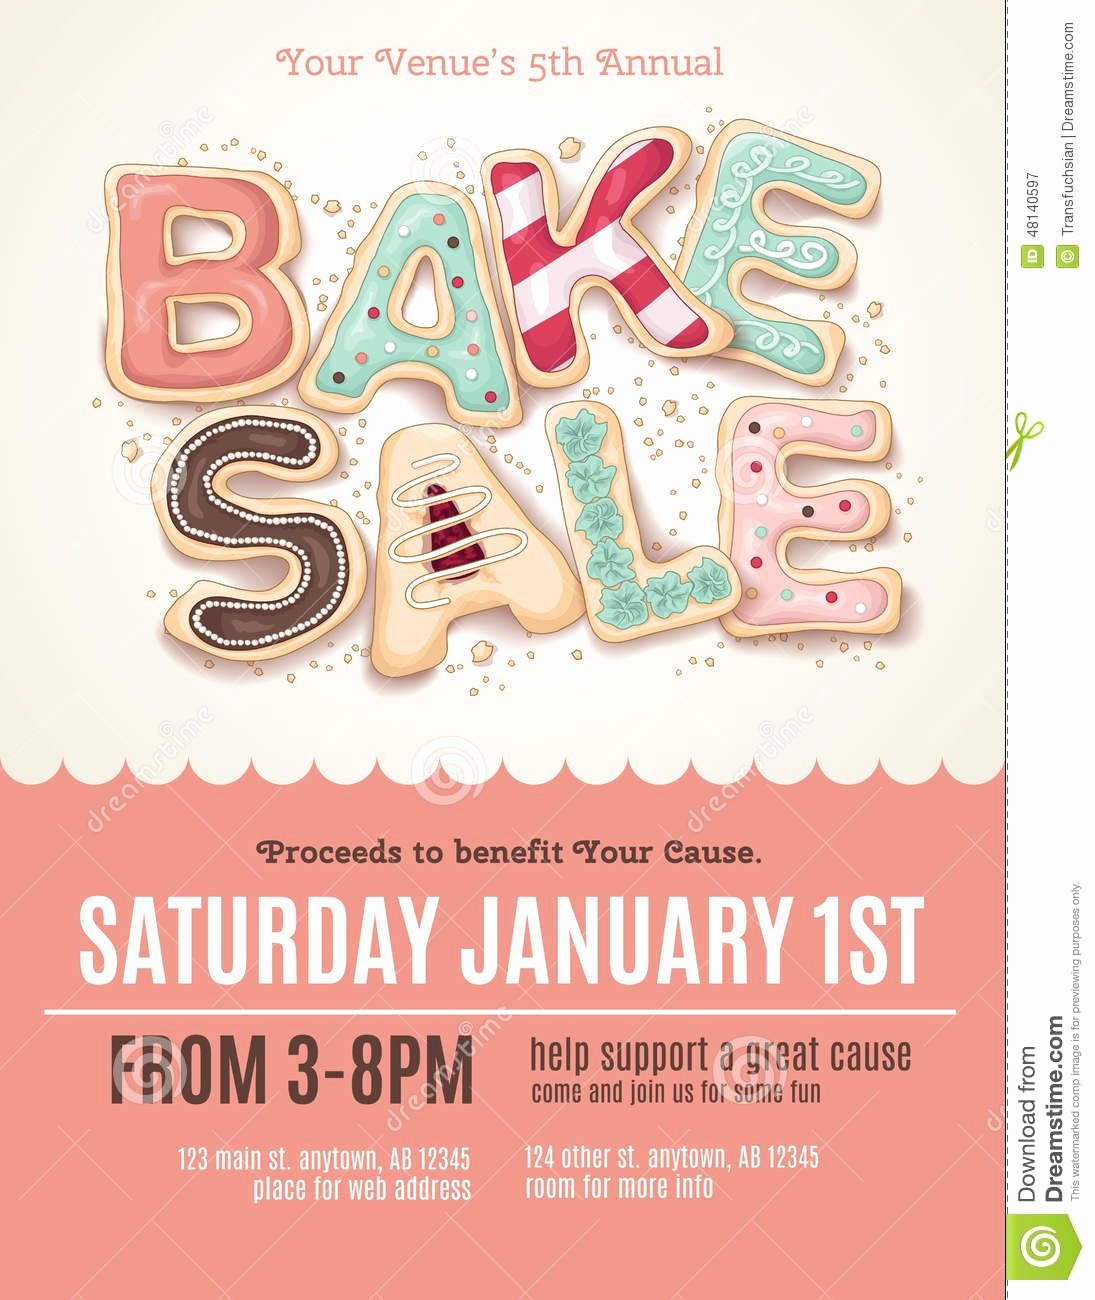 bake sale flyer ideas inspirational fun cookie bake sale flyer template download from over of bake sale flyer ideas